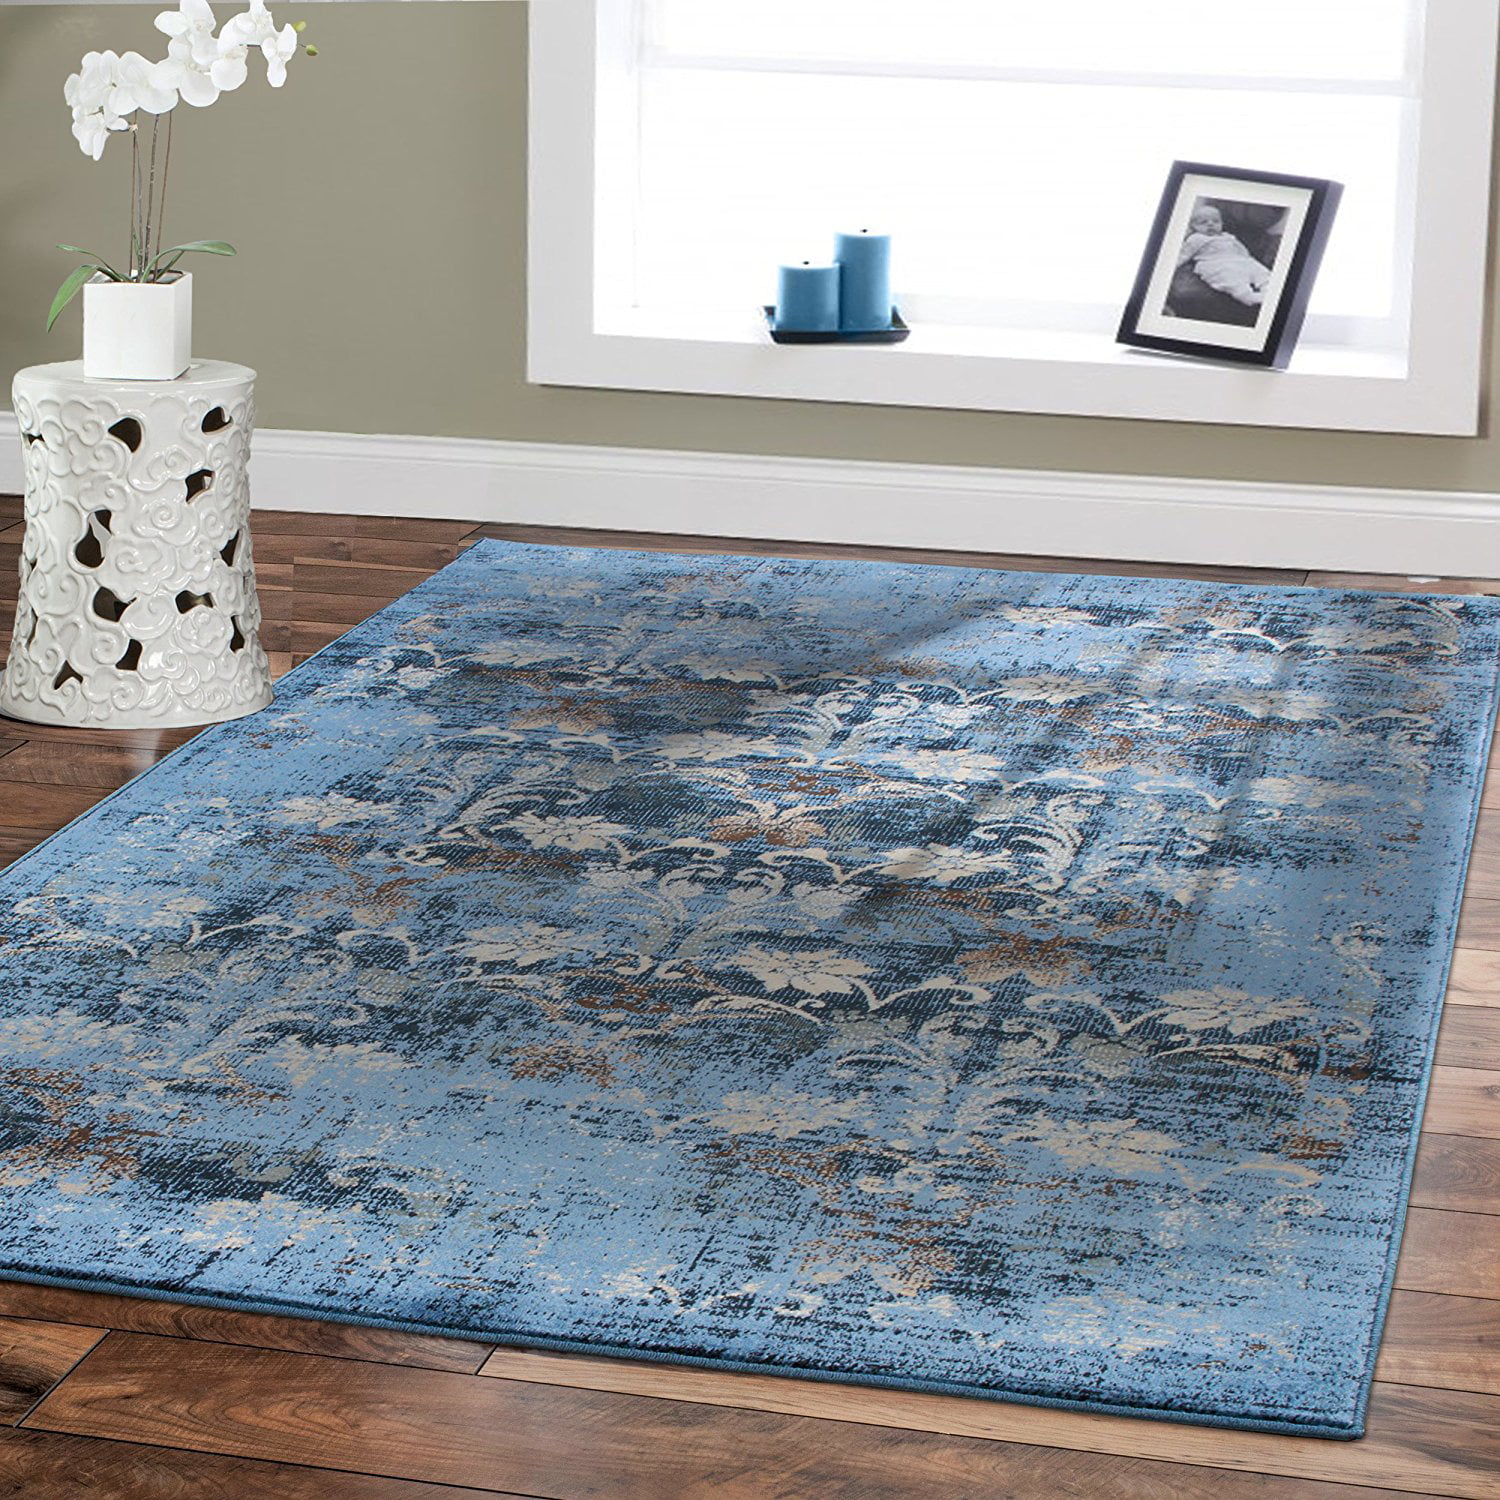 Premium Rugs Large 8x11 For Living, Area Rugs 8 X 11